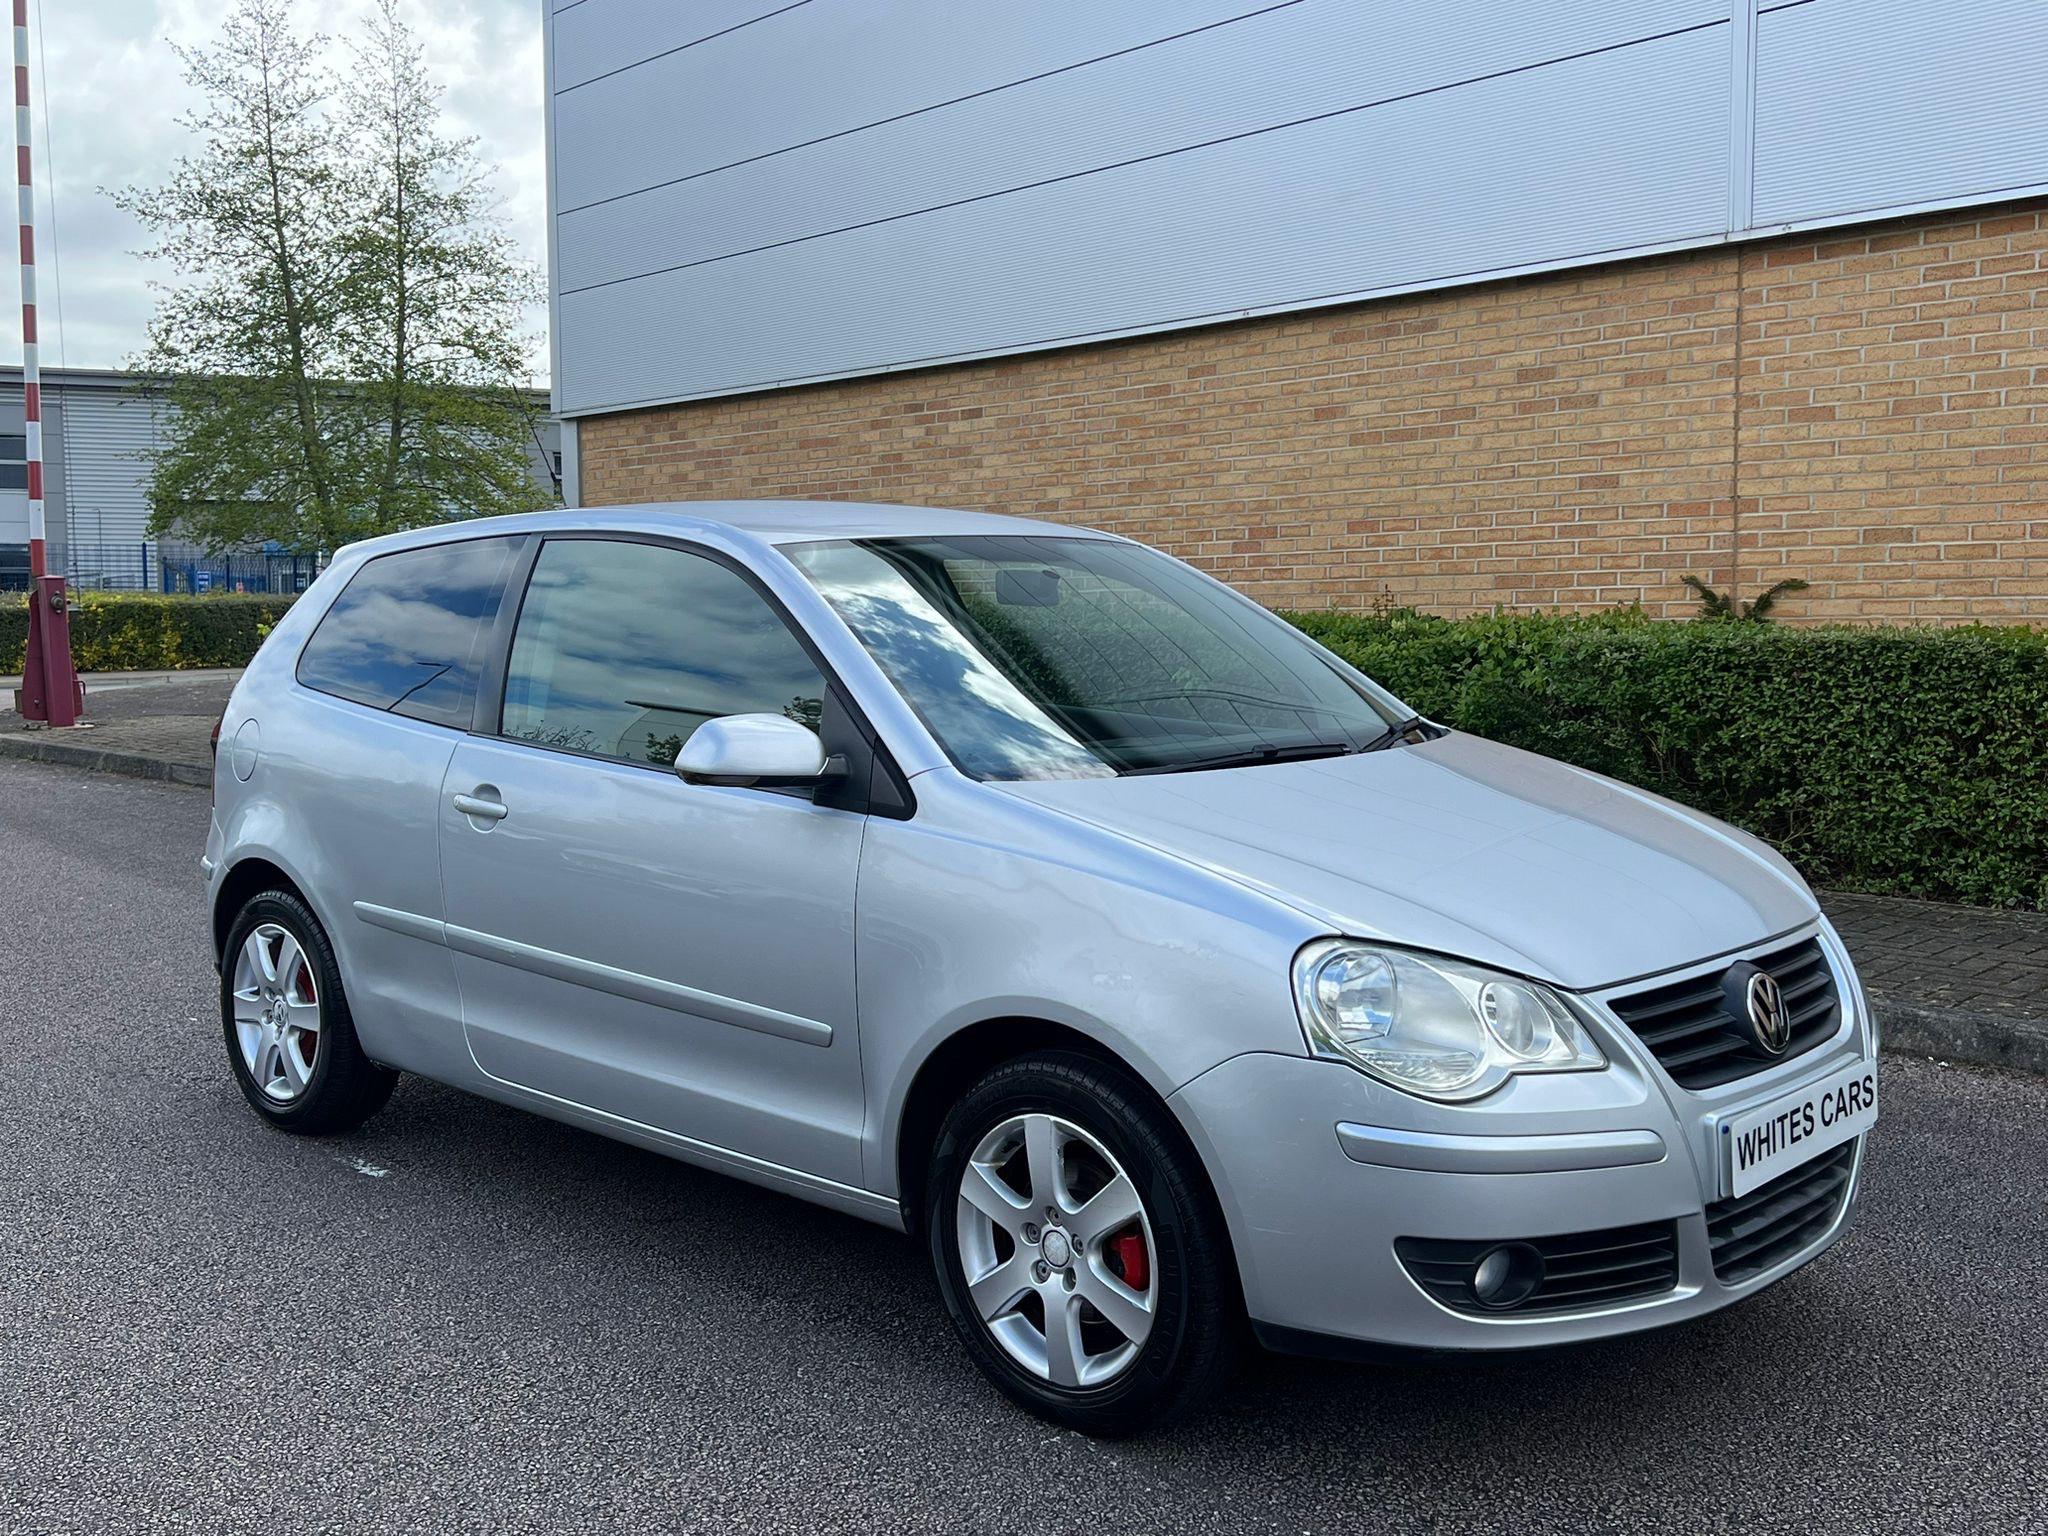 Used Volkswagen Polo - 2005-2009 Reliability & Common Problems | What Car?